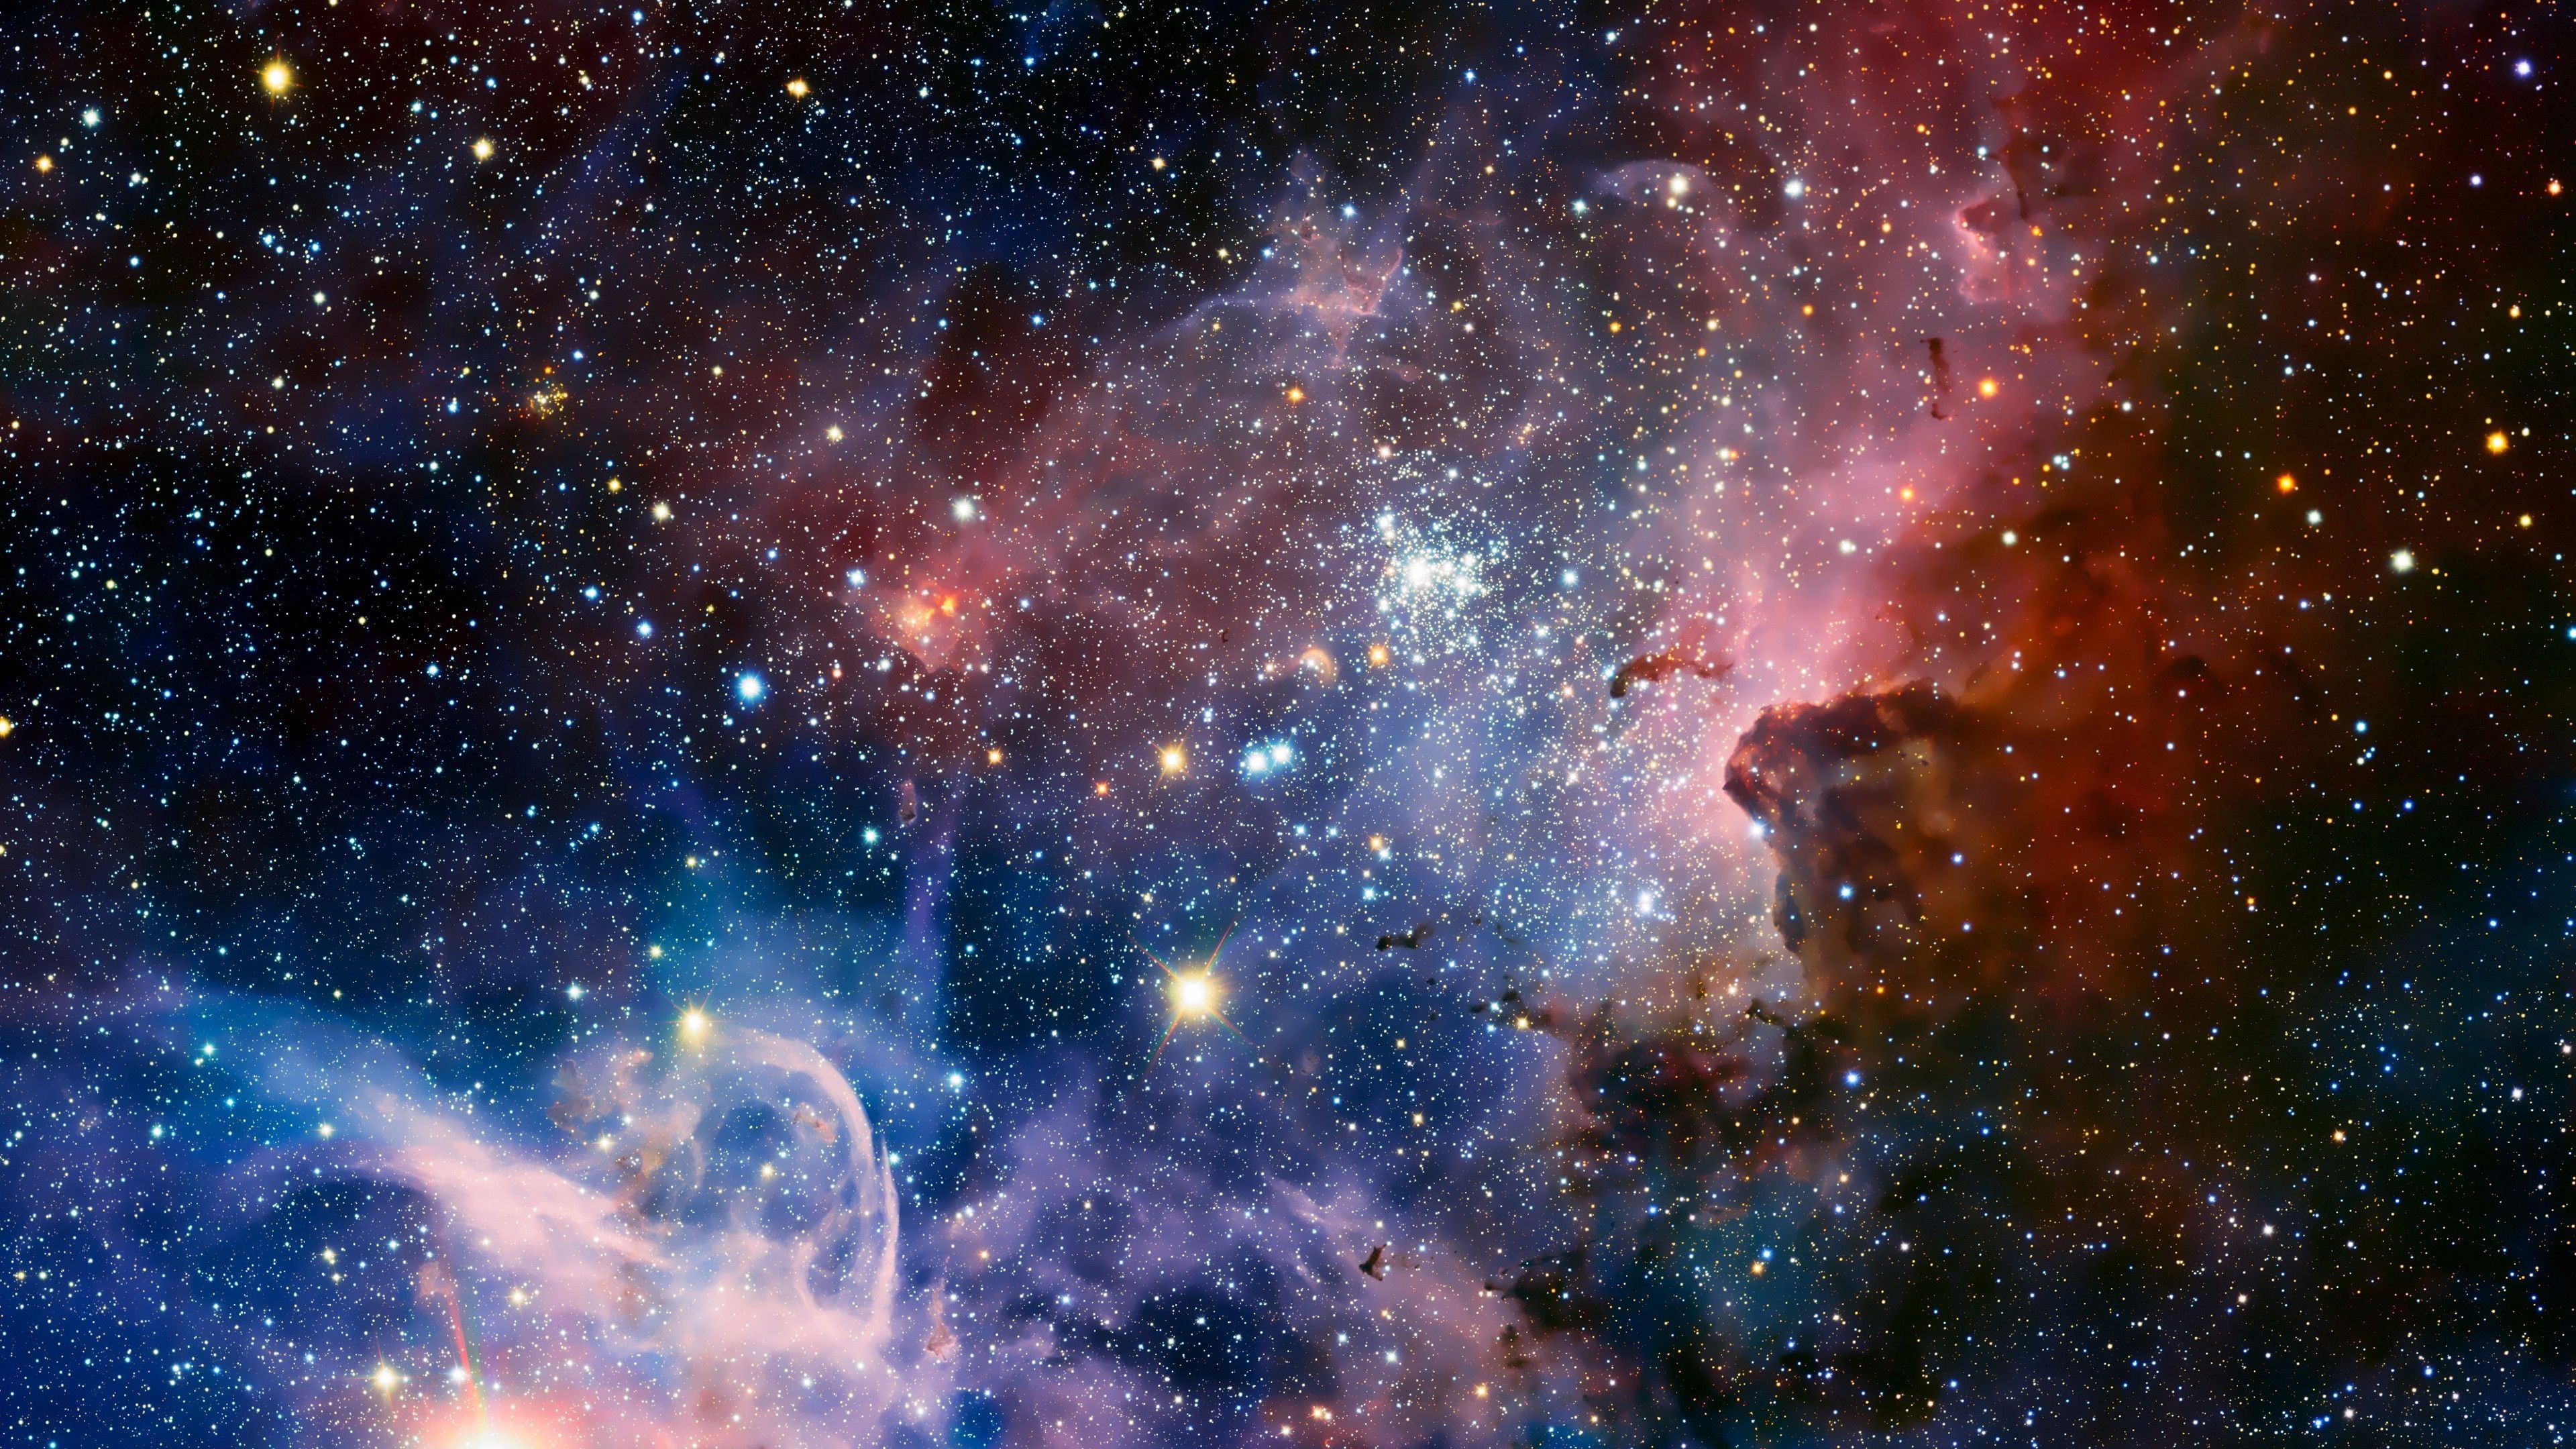 4k Space Wallpaper (best 4k Space Wallpaper and image) on WallpaperChat